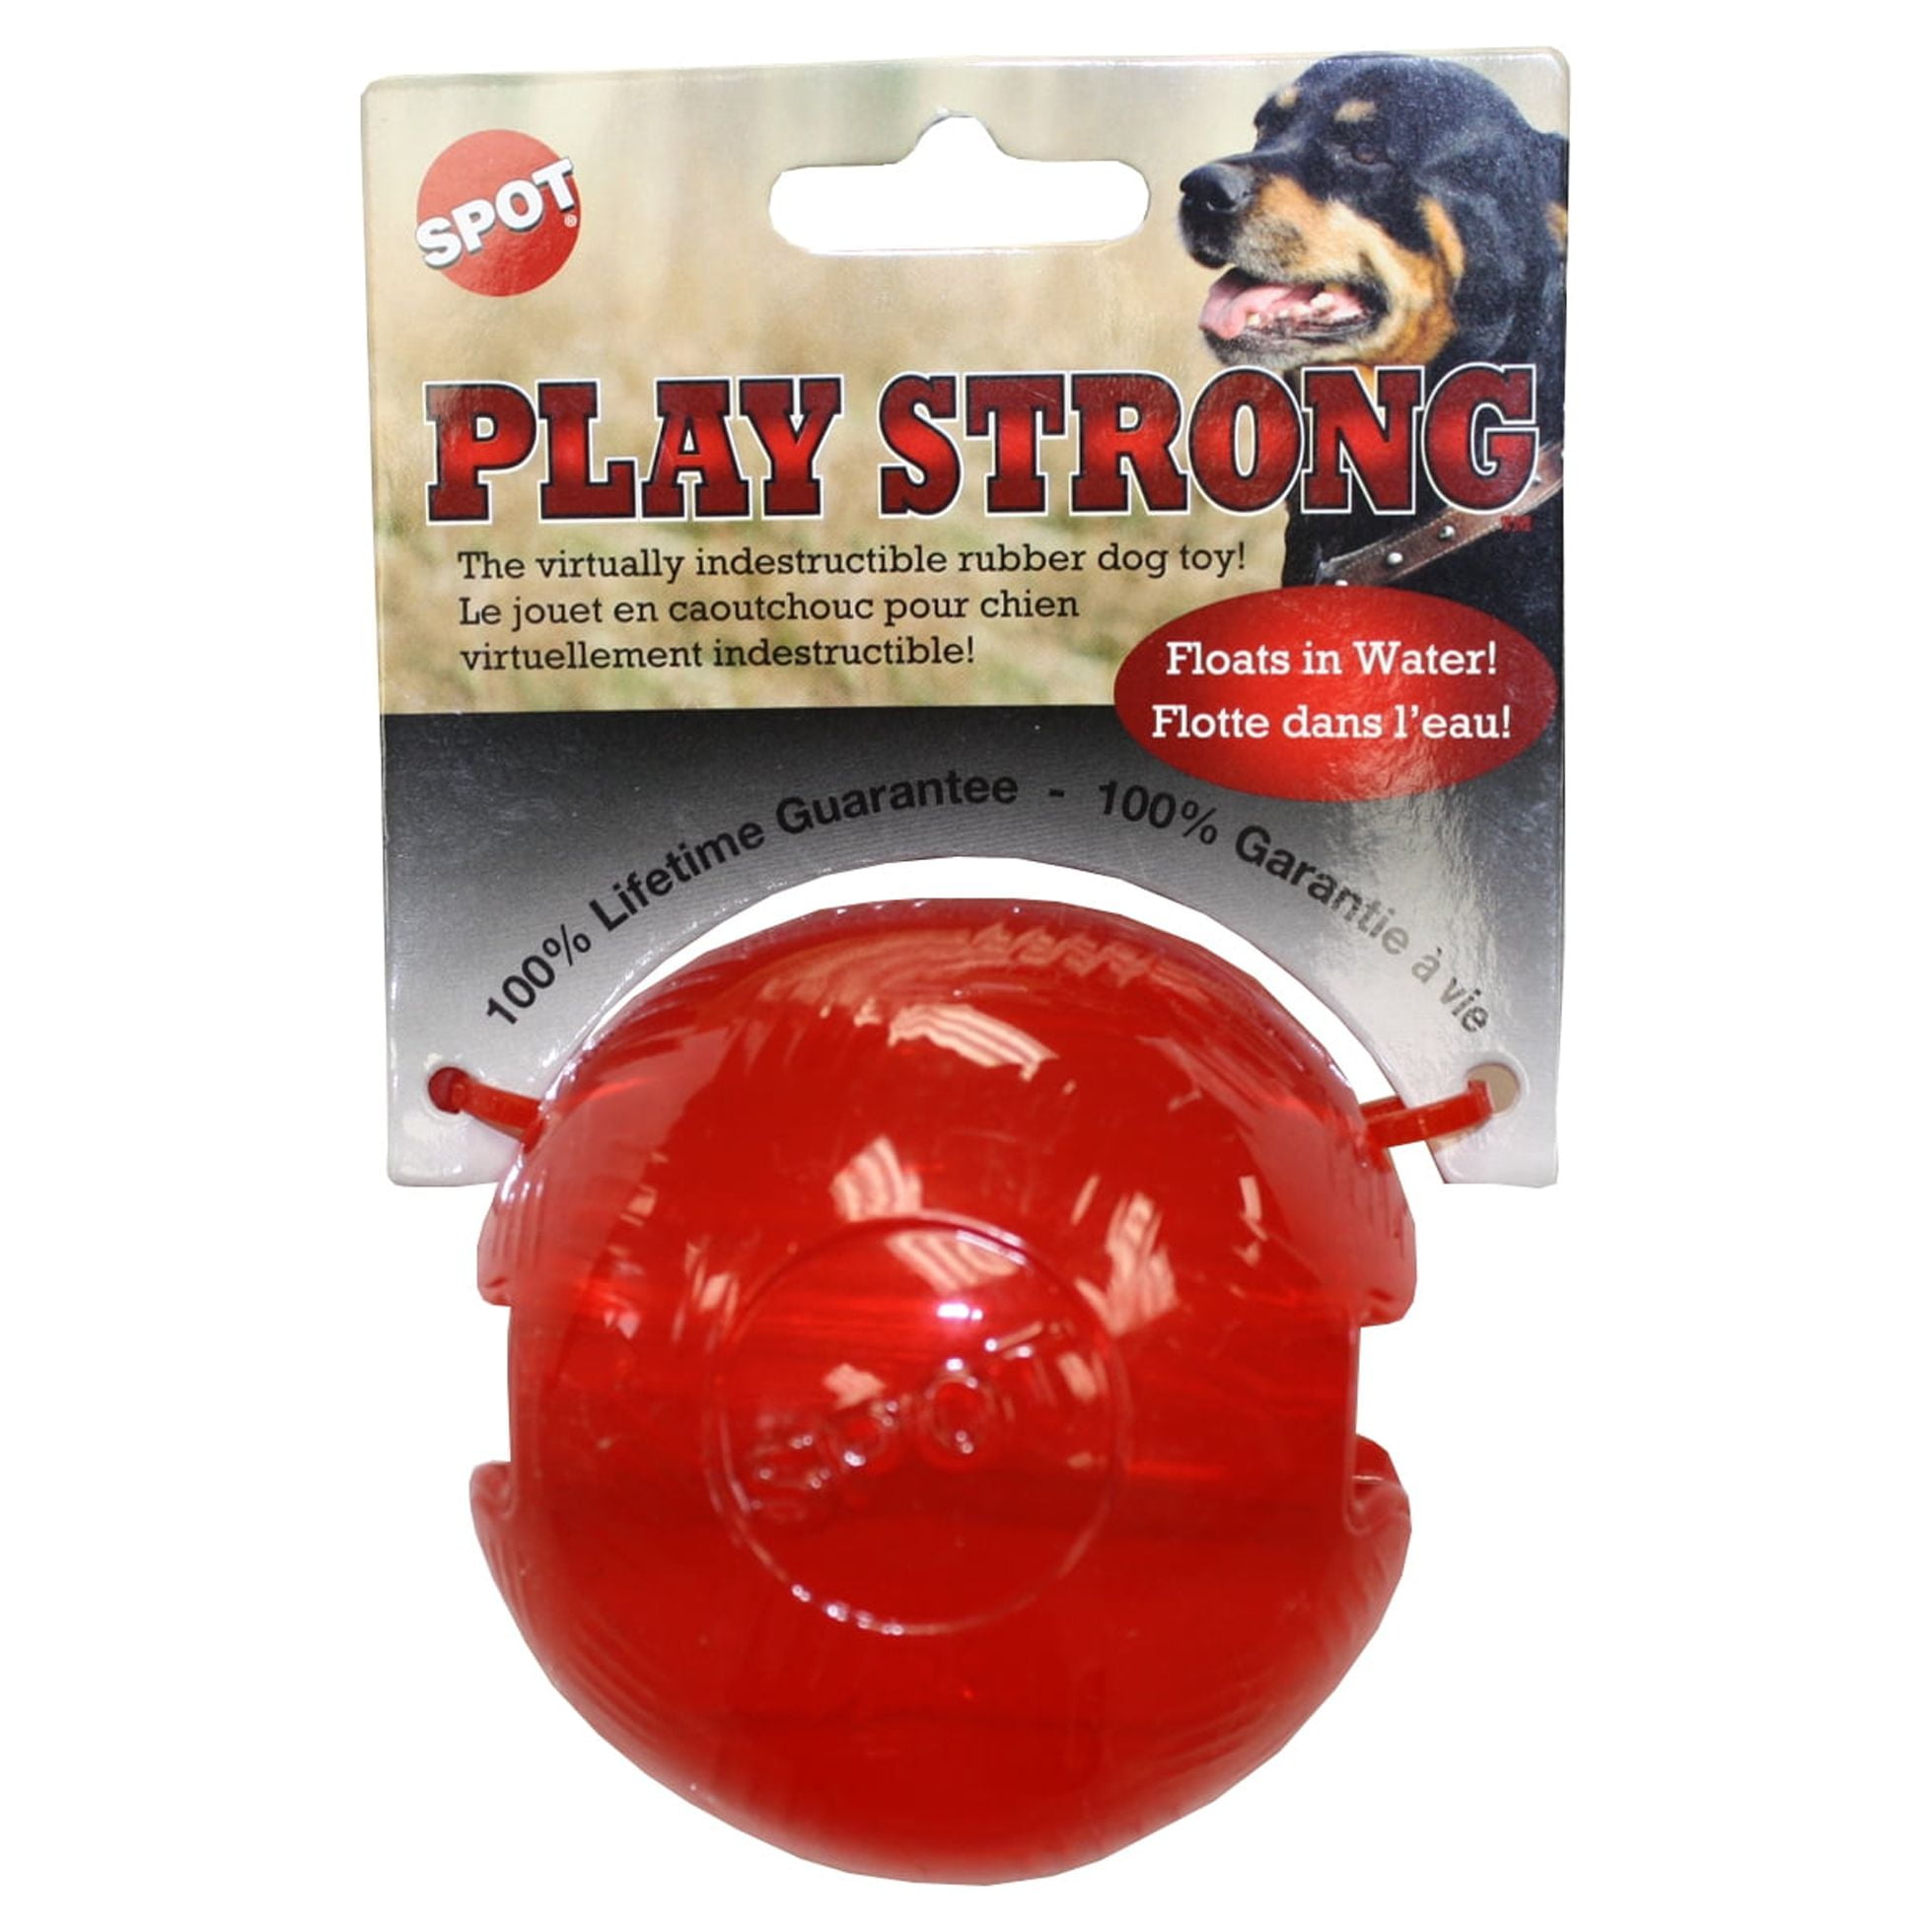 Ethical Pets Sensory Ball Rubber Dog Toy, 3.25-Inch Assorted - Pack of 2, Size: 3.25 Pack of 2